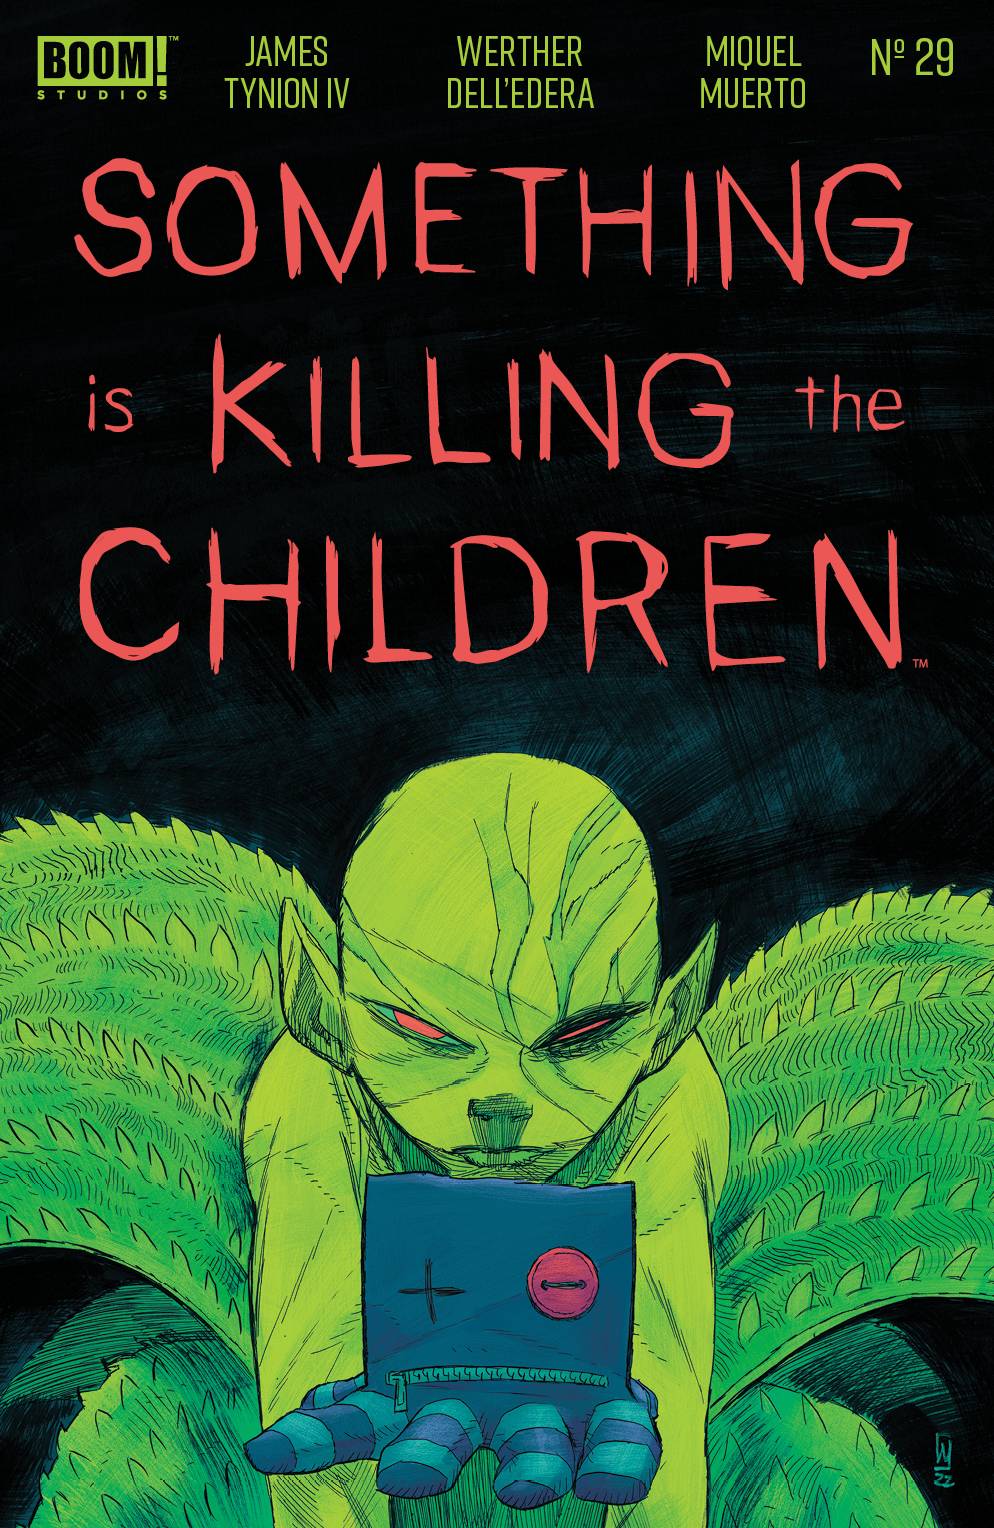 Something Is Killing The Children #29 (2019) Boom A Dell Edera Release 02/22/2023 | BD Cosmos